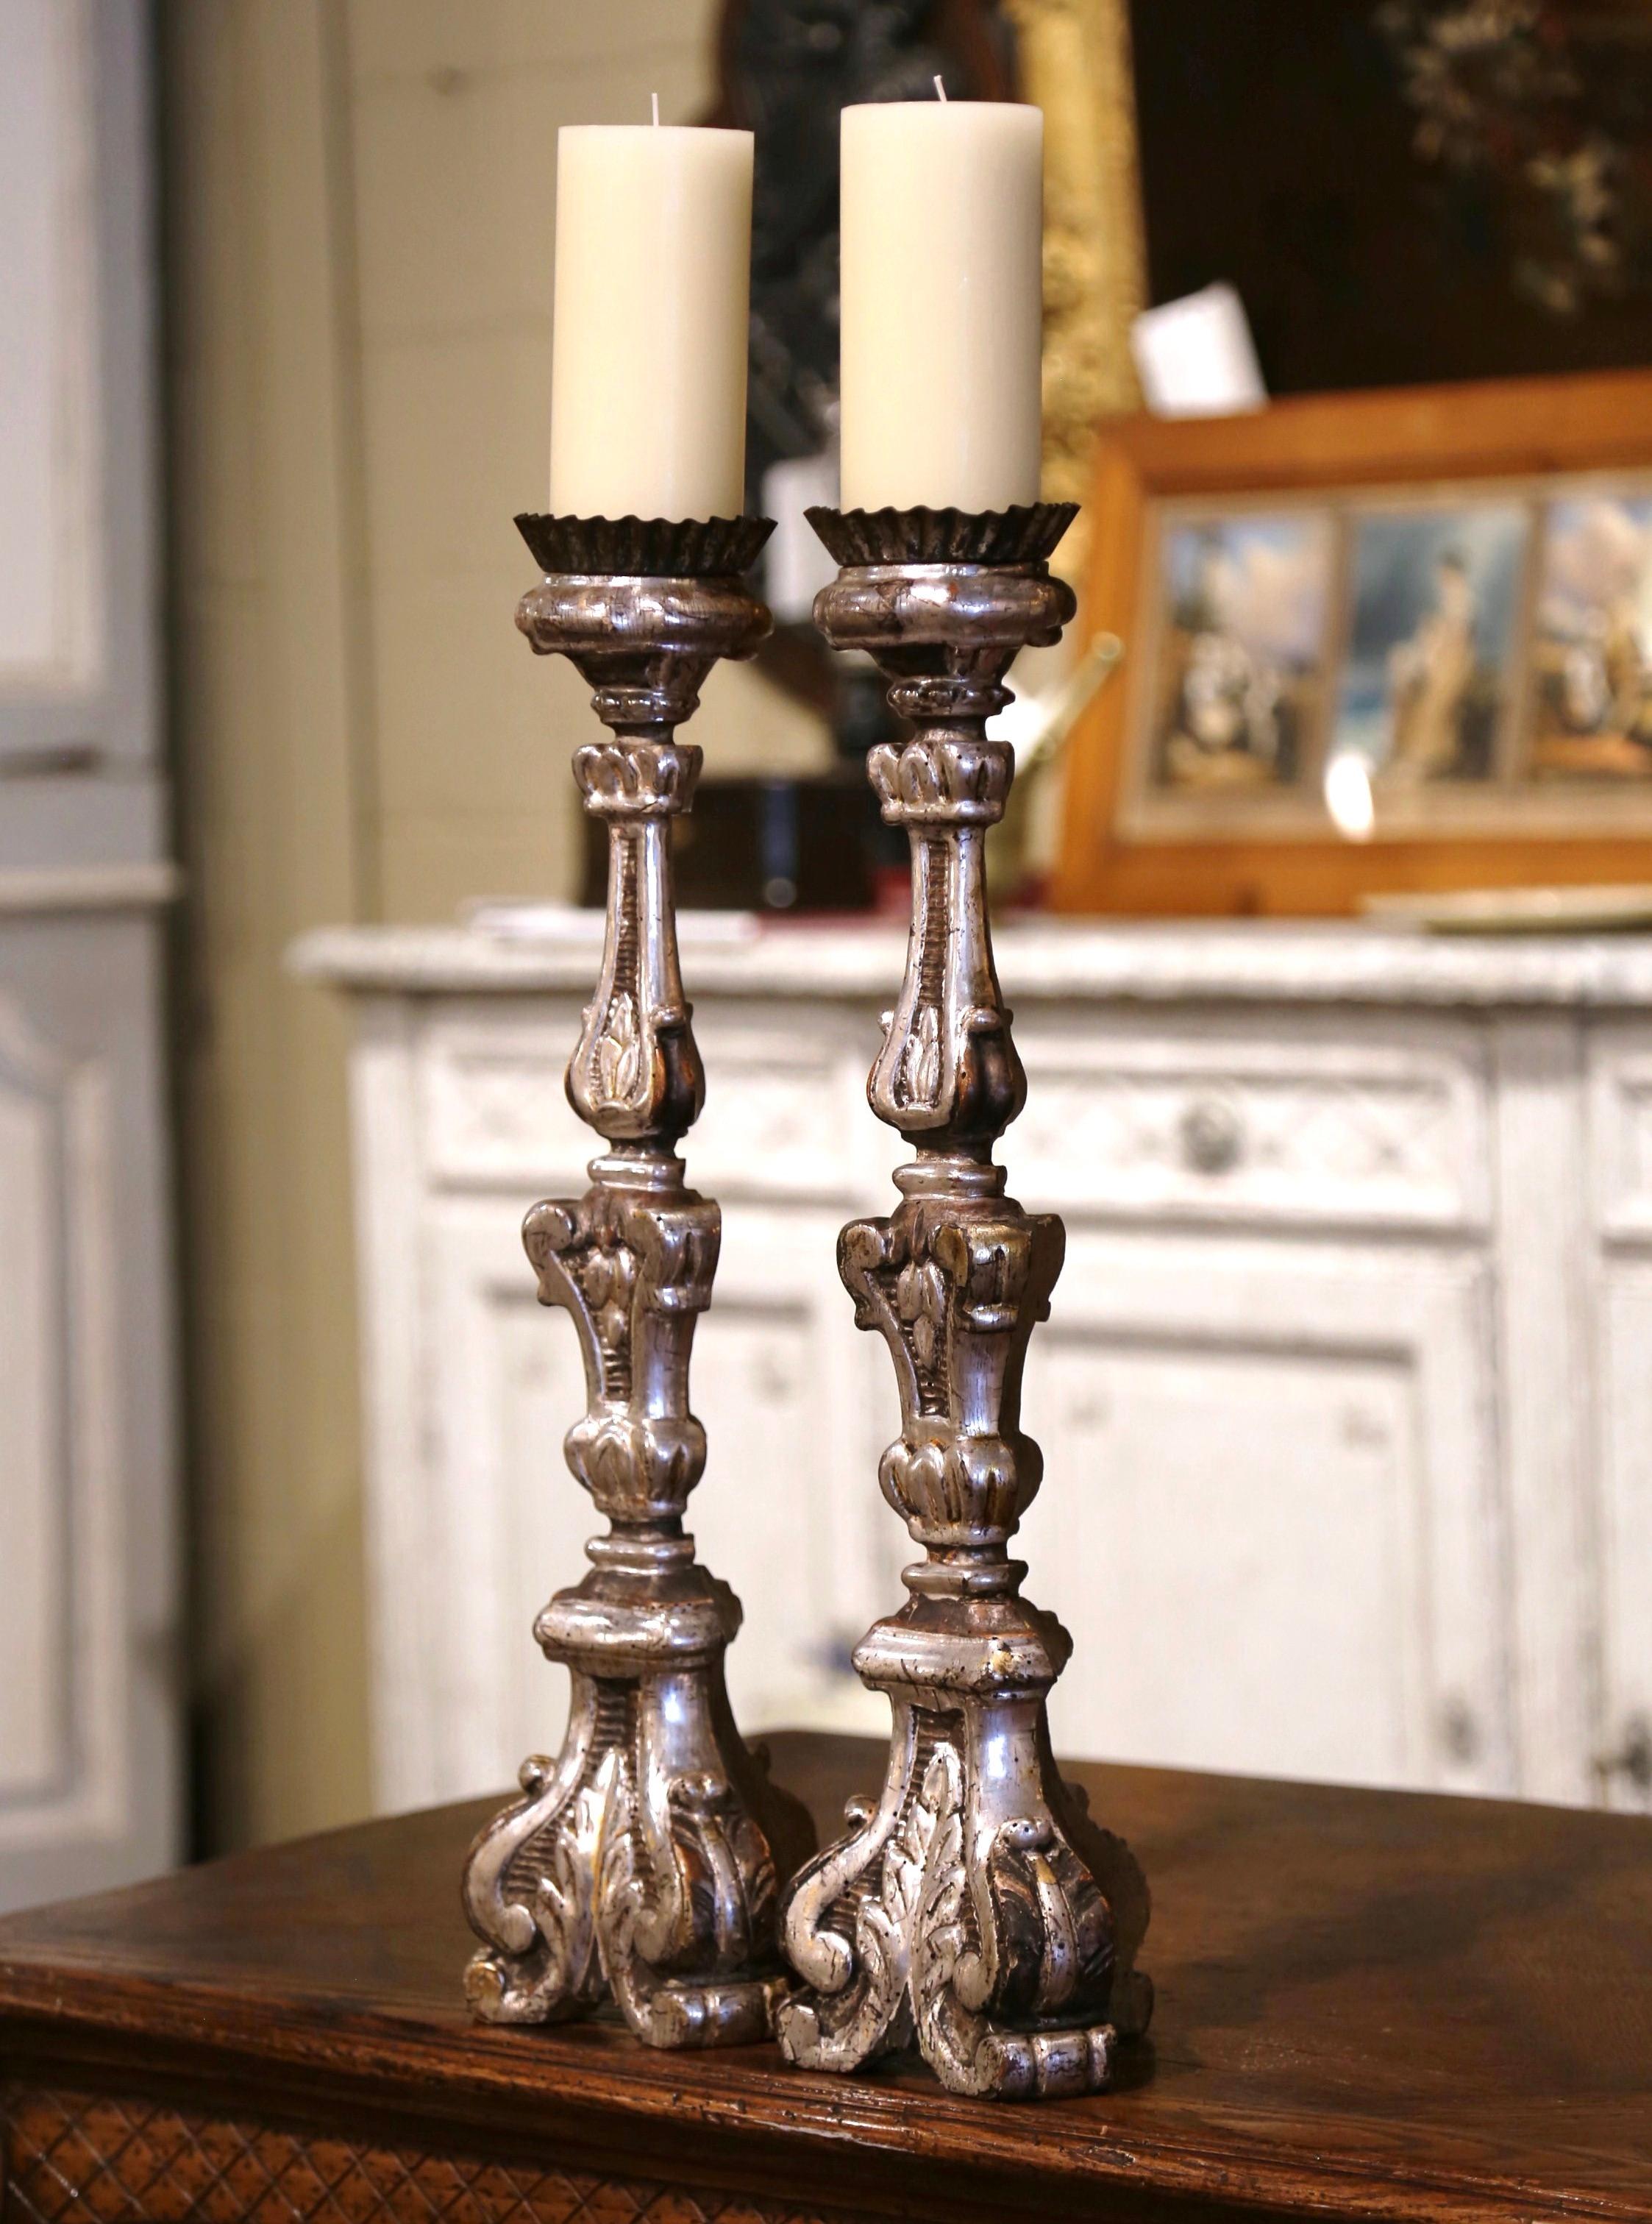 Add an air of elegance to your home with this pair of antique candlesticks. Crafted in Italy circa 1880, each candle holder stands on a sturdy triangle base decorated with hand carved acanthus leaf motifs over a carved stem embellished with foliage